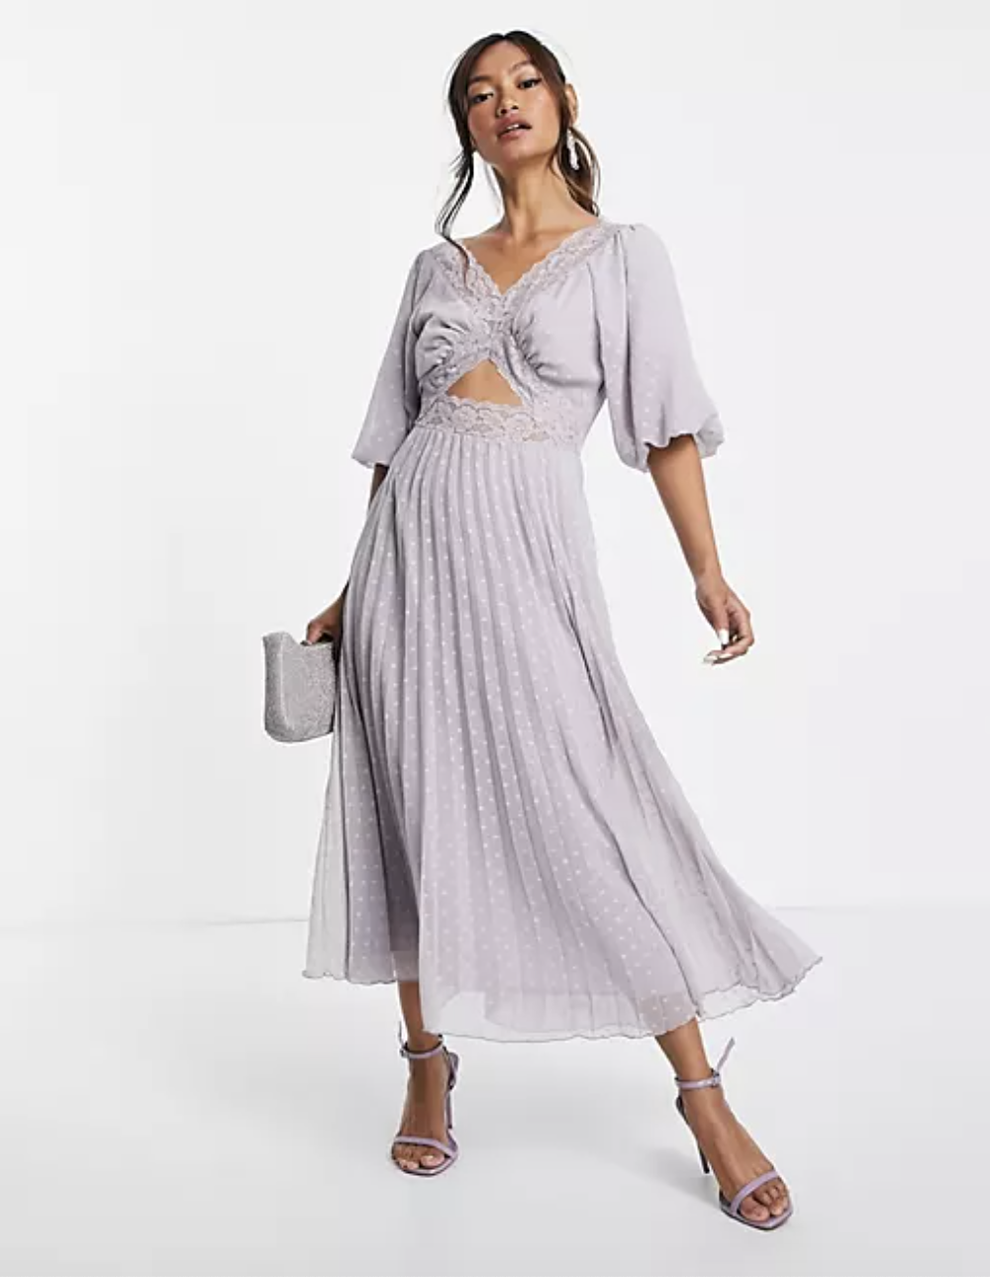 33 Great Dresses To Wear To A Fall Wedding